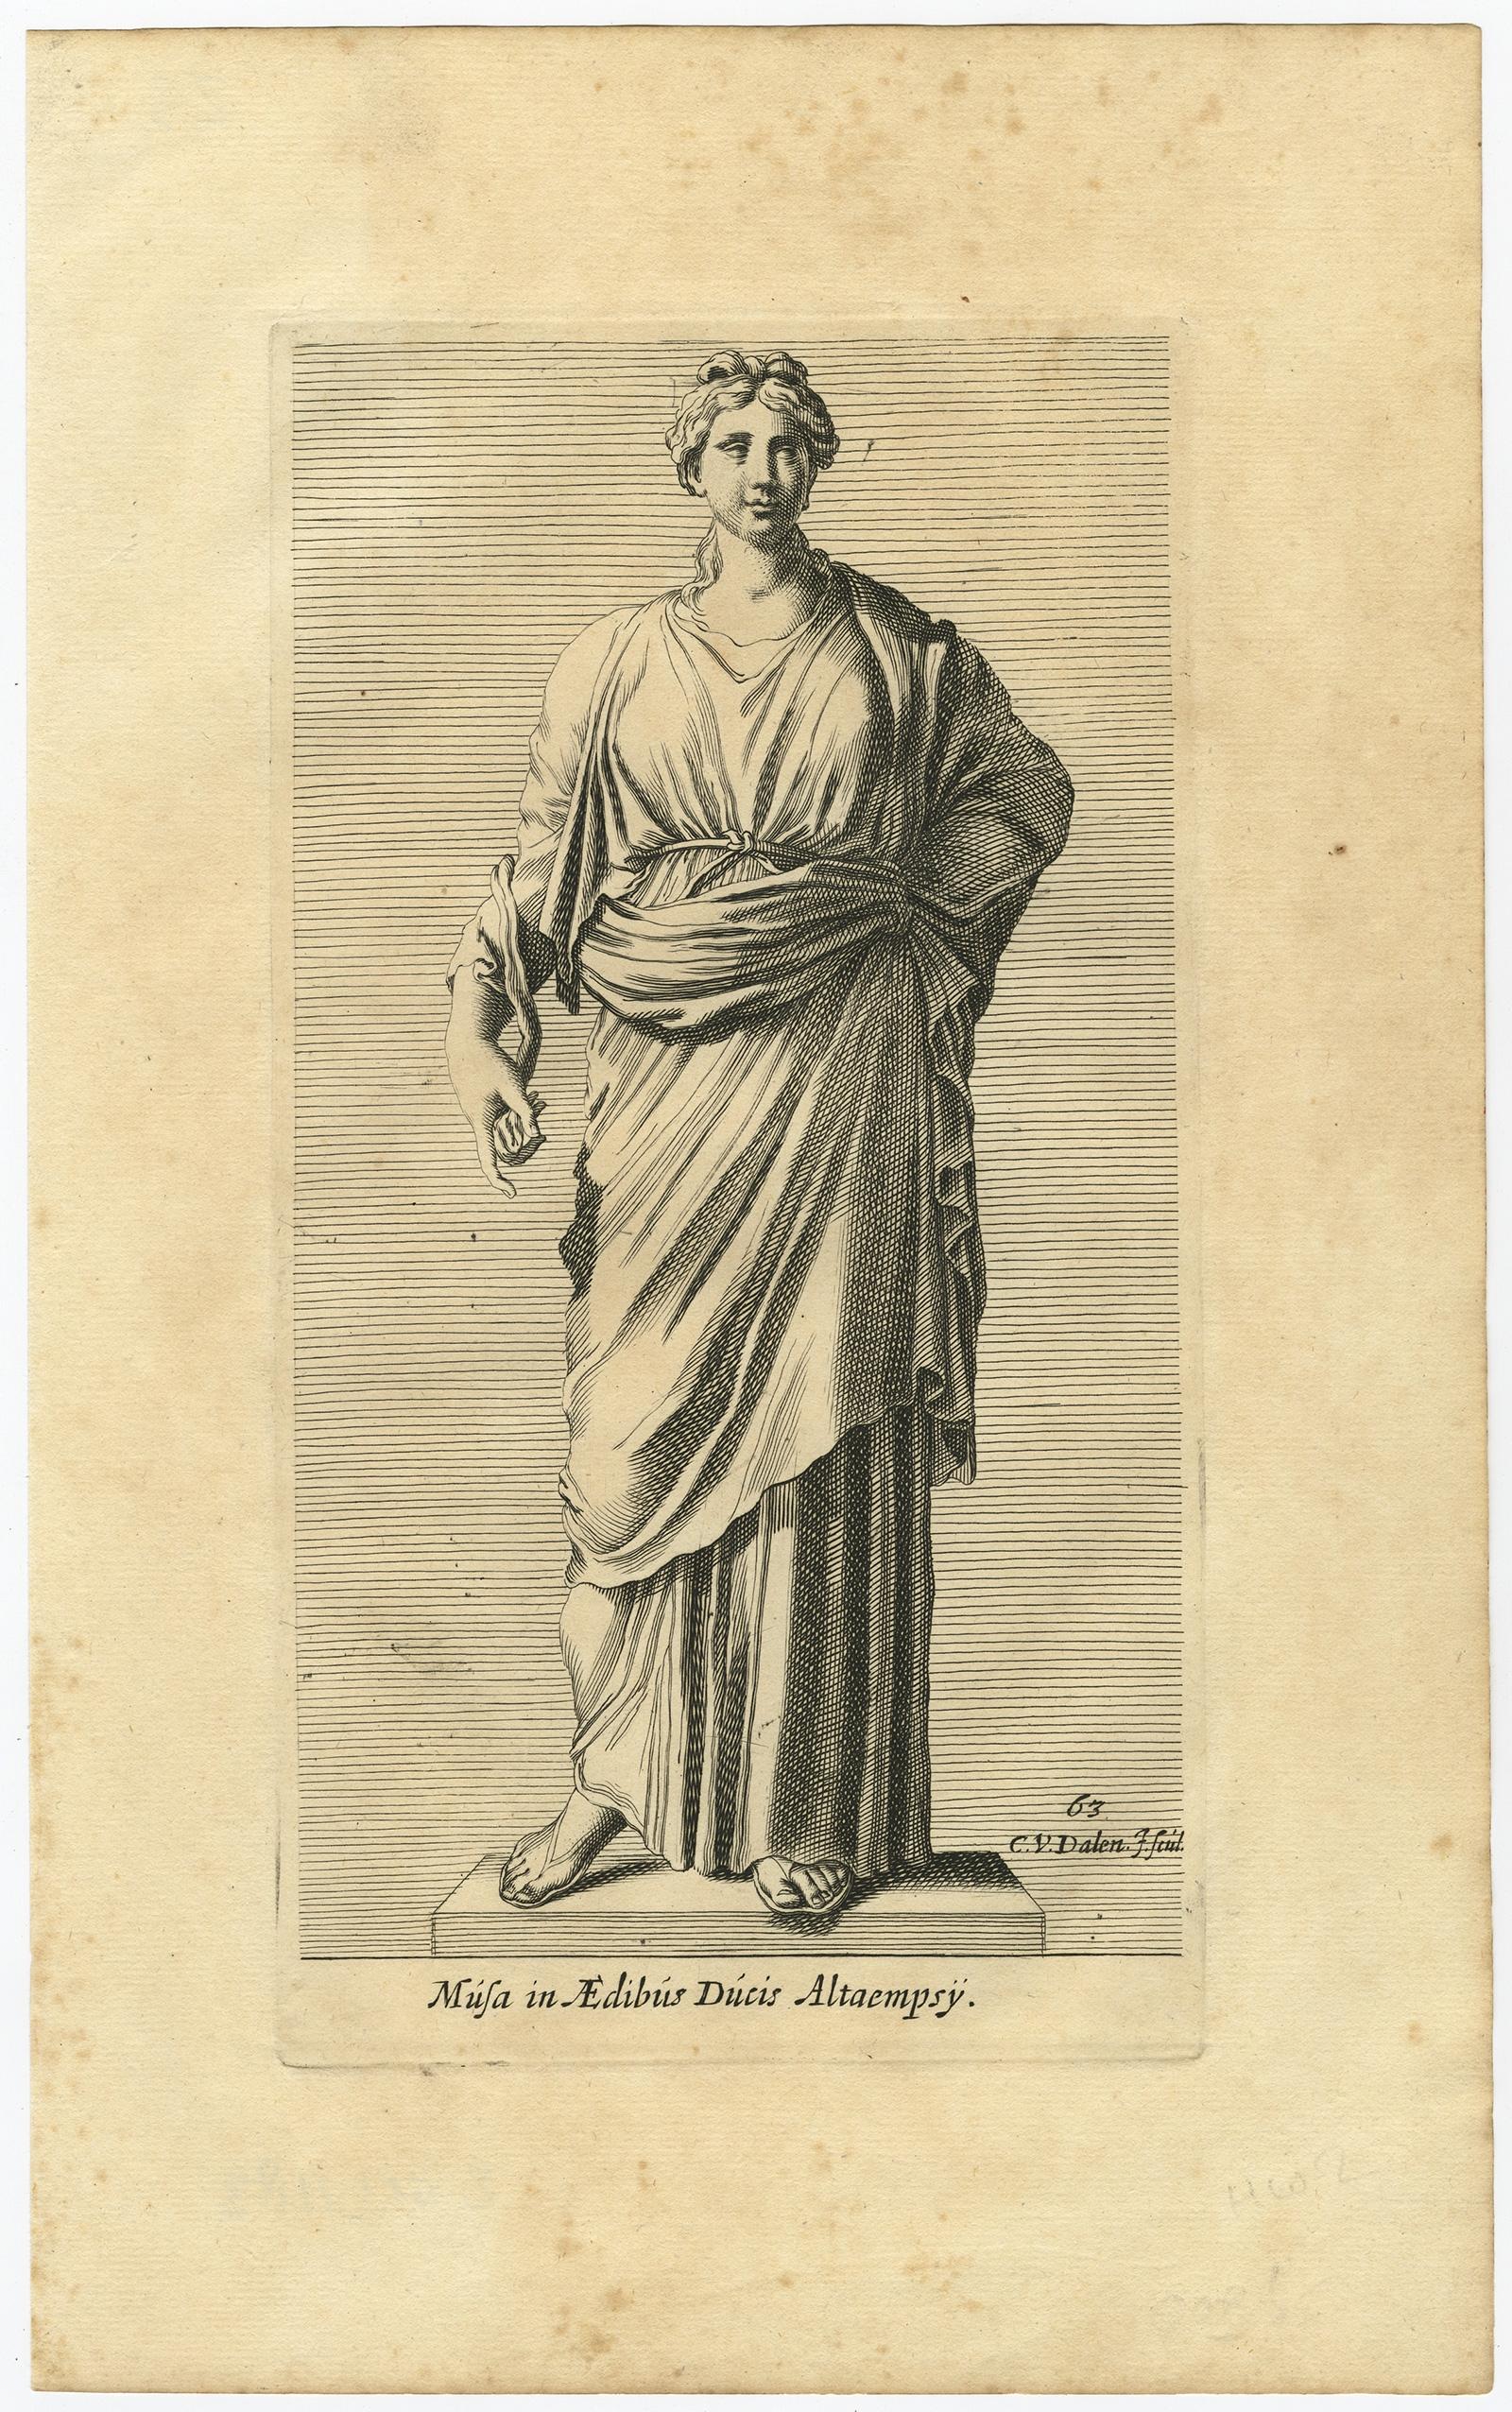 Description: Antique print, titled: 'Musa in Aedibus Ducis Altaempsy.' - Statue of a Muse in Rome. The Muses are the inspirational goddesses of literature, science, and the arts in Greek mythology.

From the 1660 Dutch edition of 'Icones et Segmenta